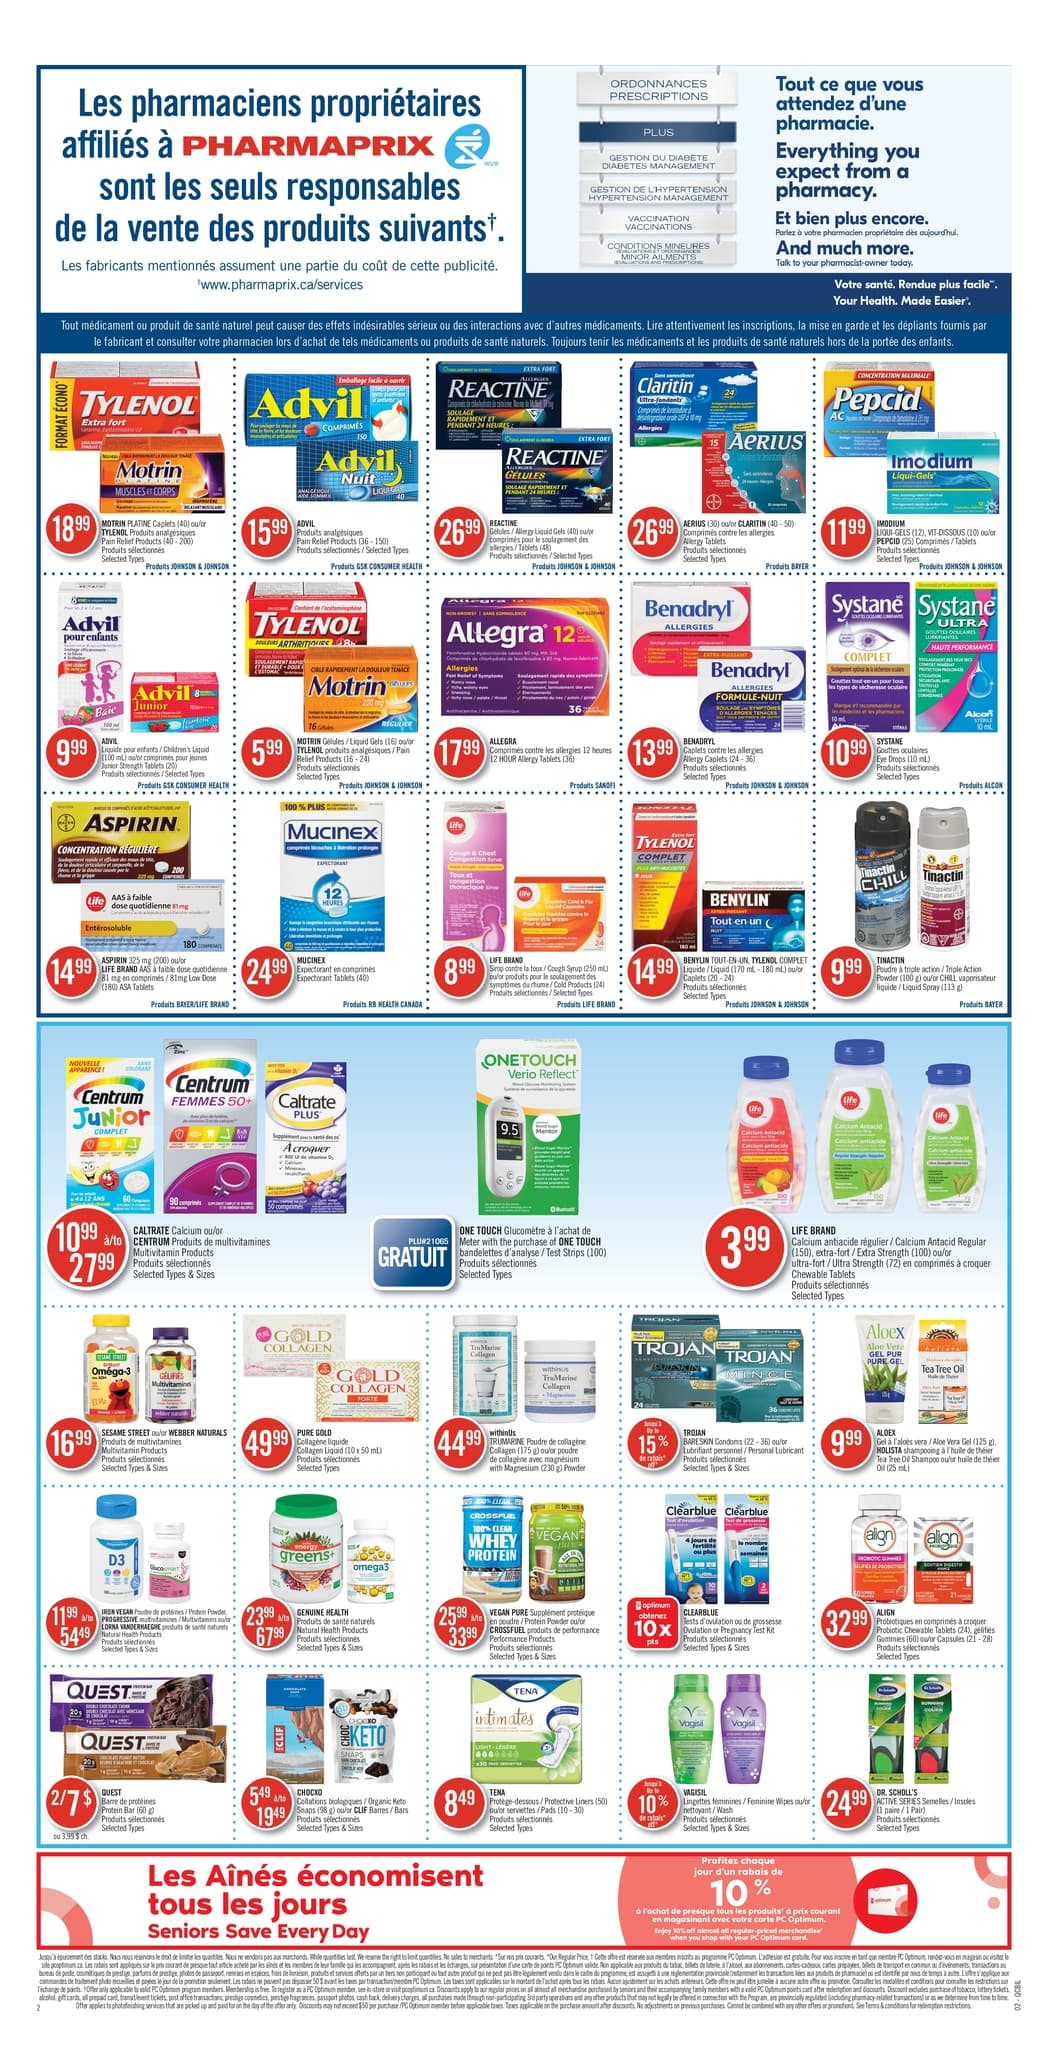 Pharmaprix - Weekly Flyer Specials - Page 4